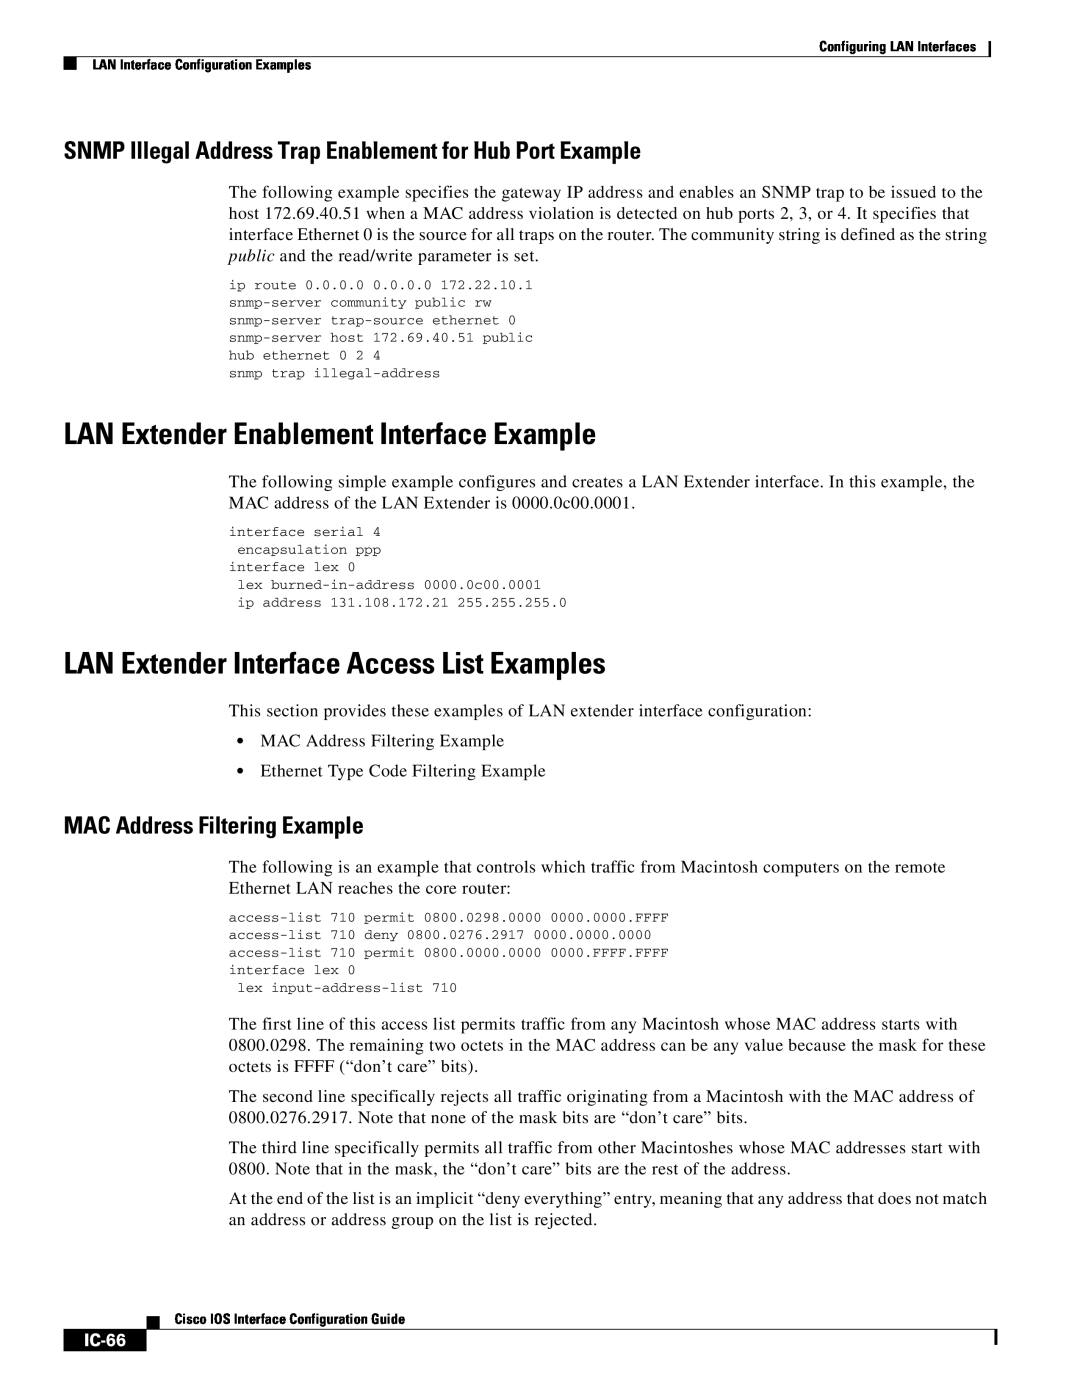 Cisco Systems IC-23 manual LAN Extender Enablement Interface Example, LAN Extender Interface Access List Examples, IC-66 